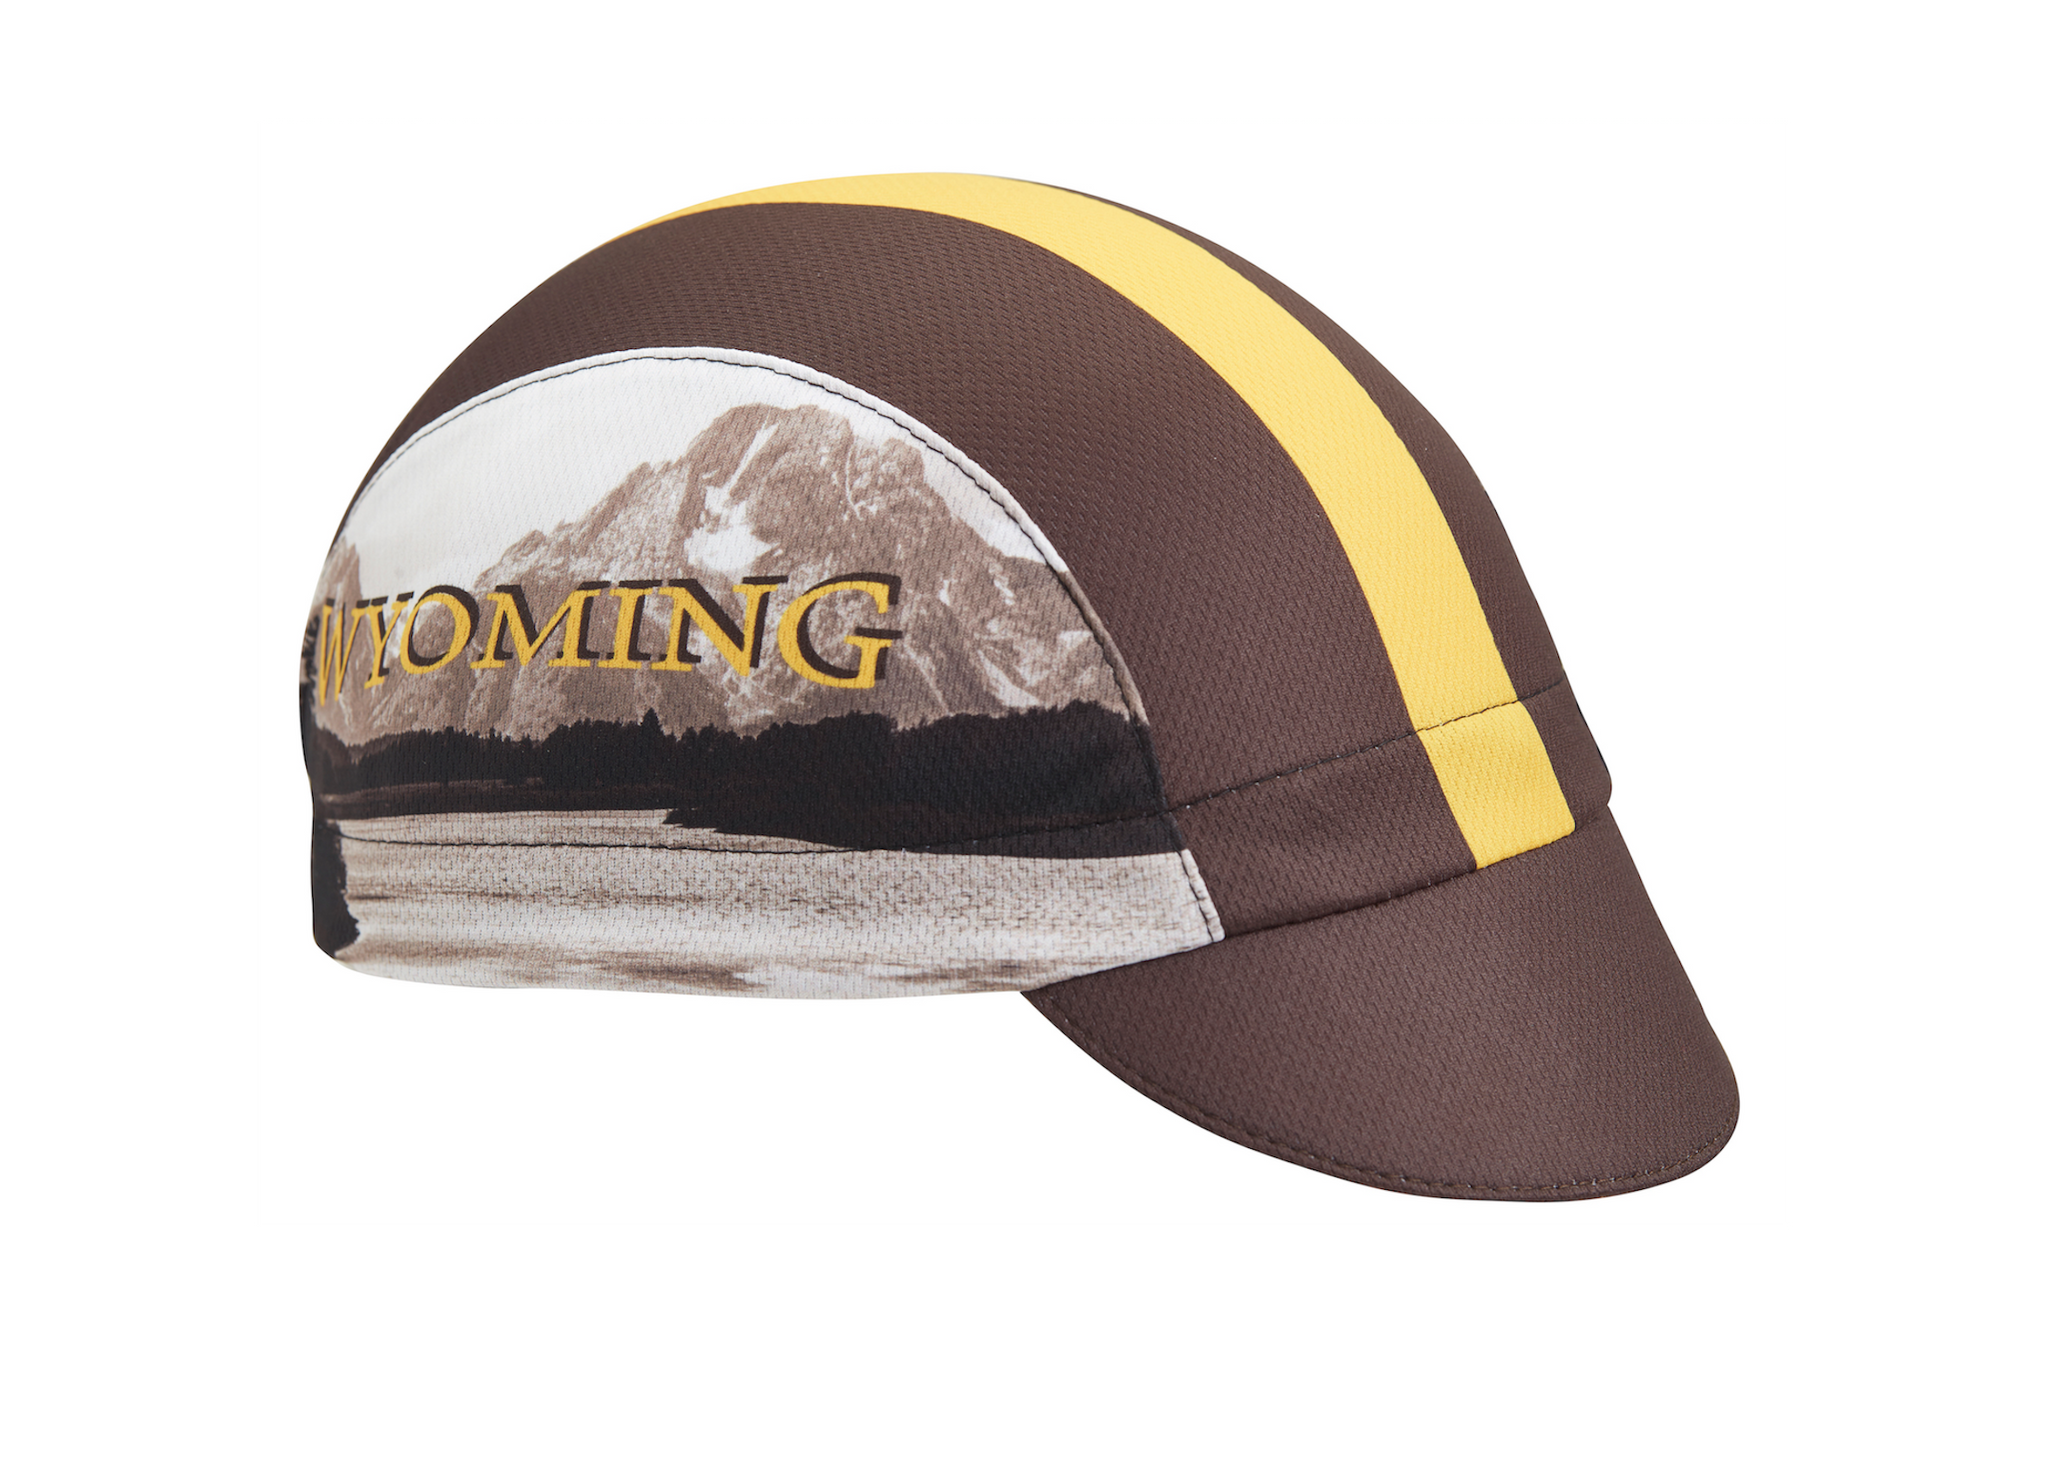 Wyoming Technical 3-Panel Cycling Cap. Brown cap with yellow stripe and Grand Teton imagery on side.  Angled view.